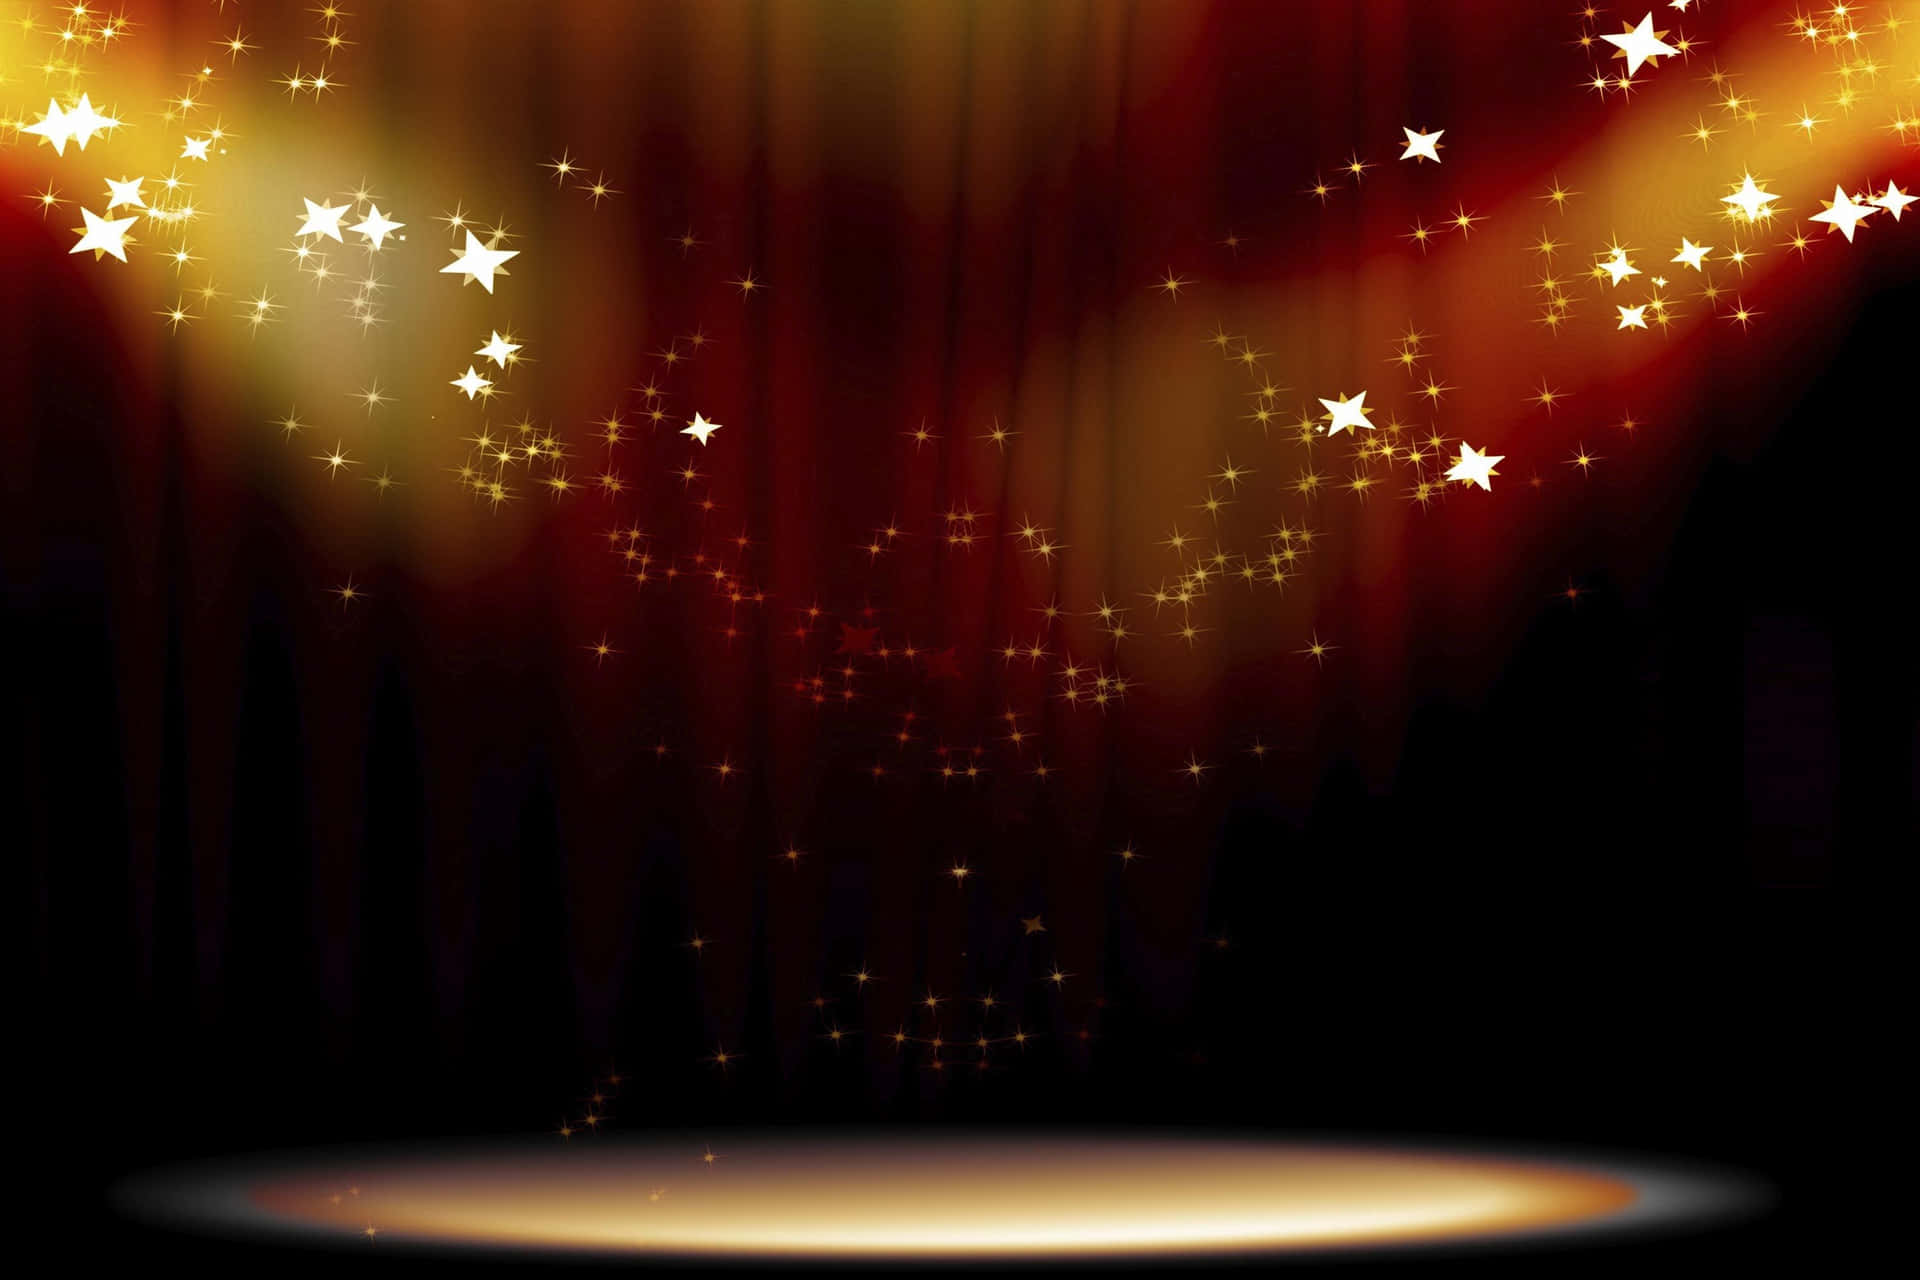 Stage Background With Stars Vector | Price 1 Credit Usd $1